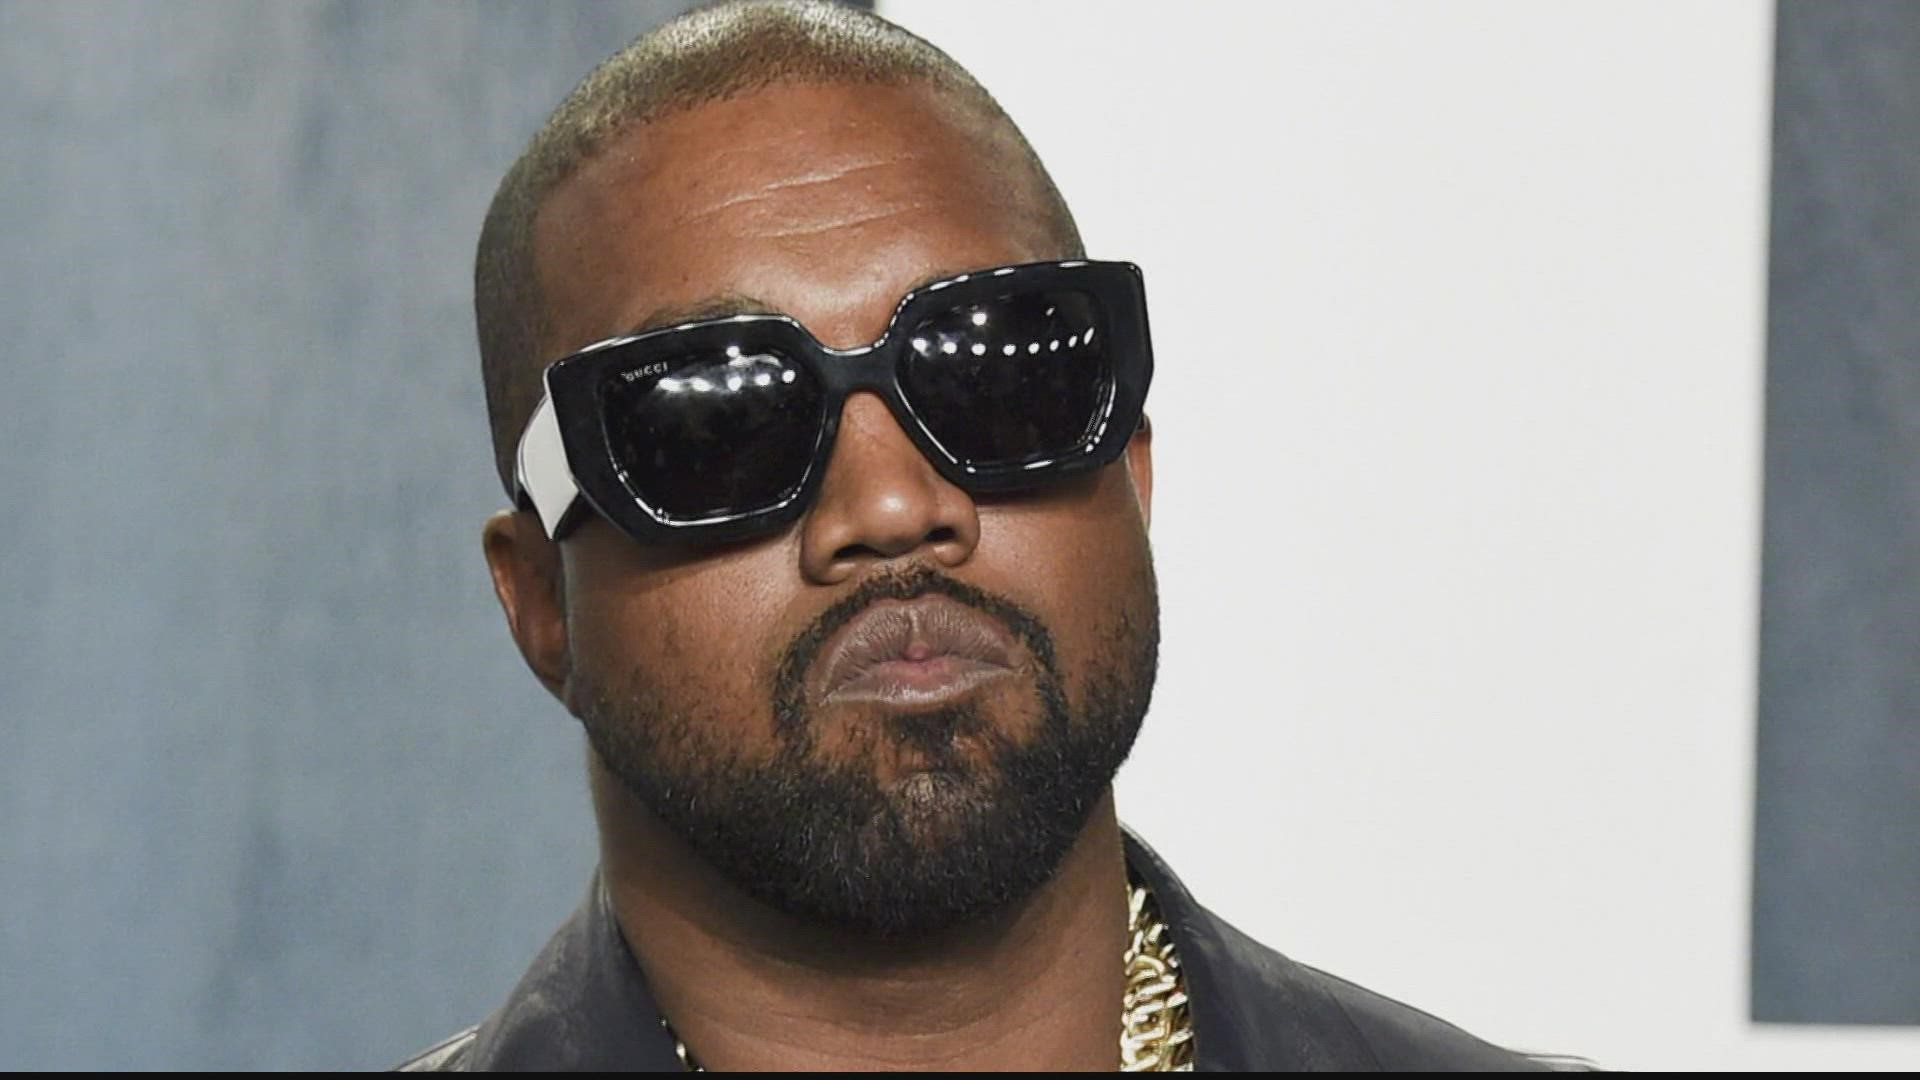 Adidas was under major pressure to end its lucrative sneaker deal with Ye, formerly known as Kanye West.